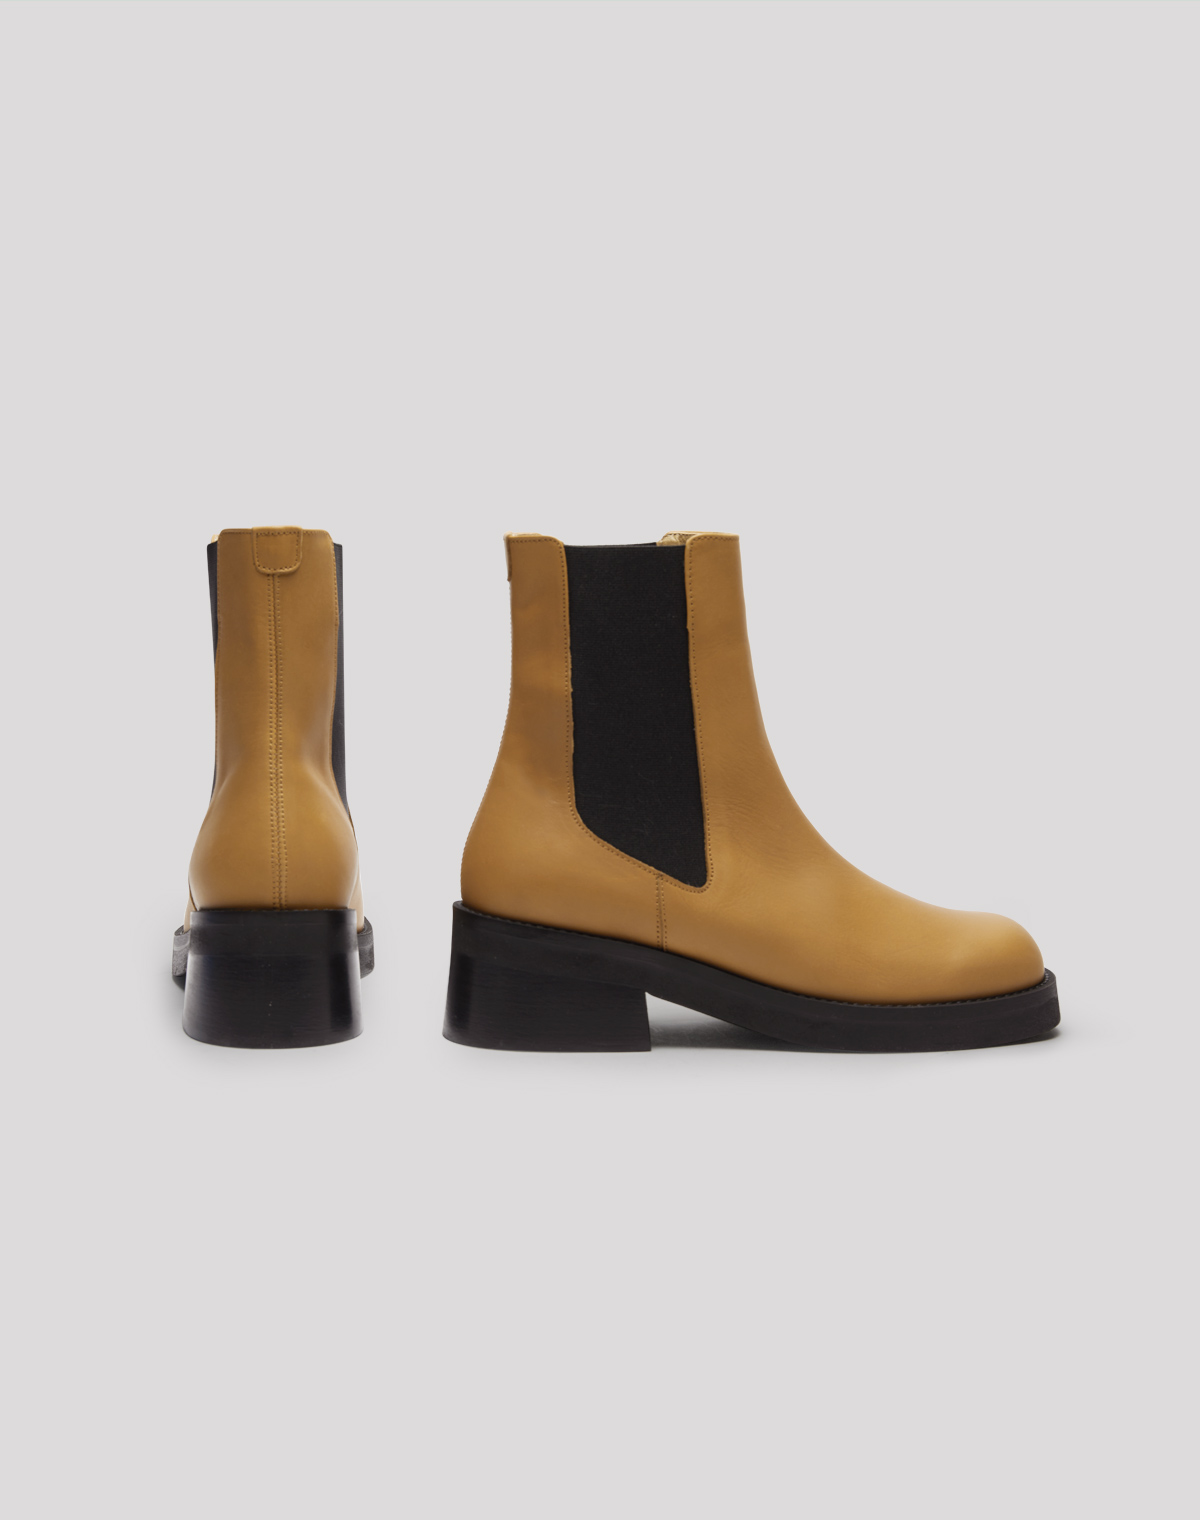 Thea Beige Ankle Boots // E8 Shoes // Made in Portugal